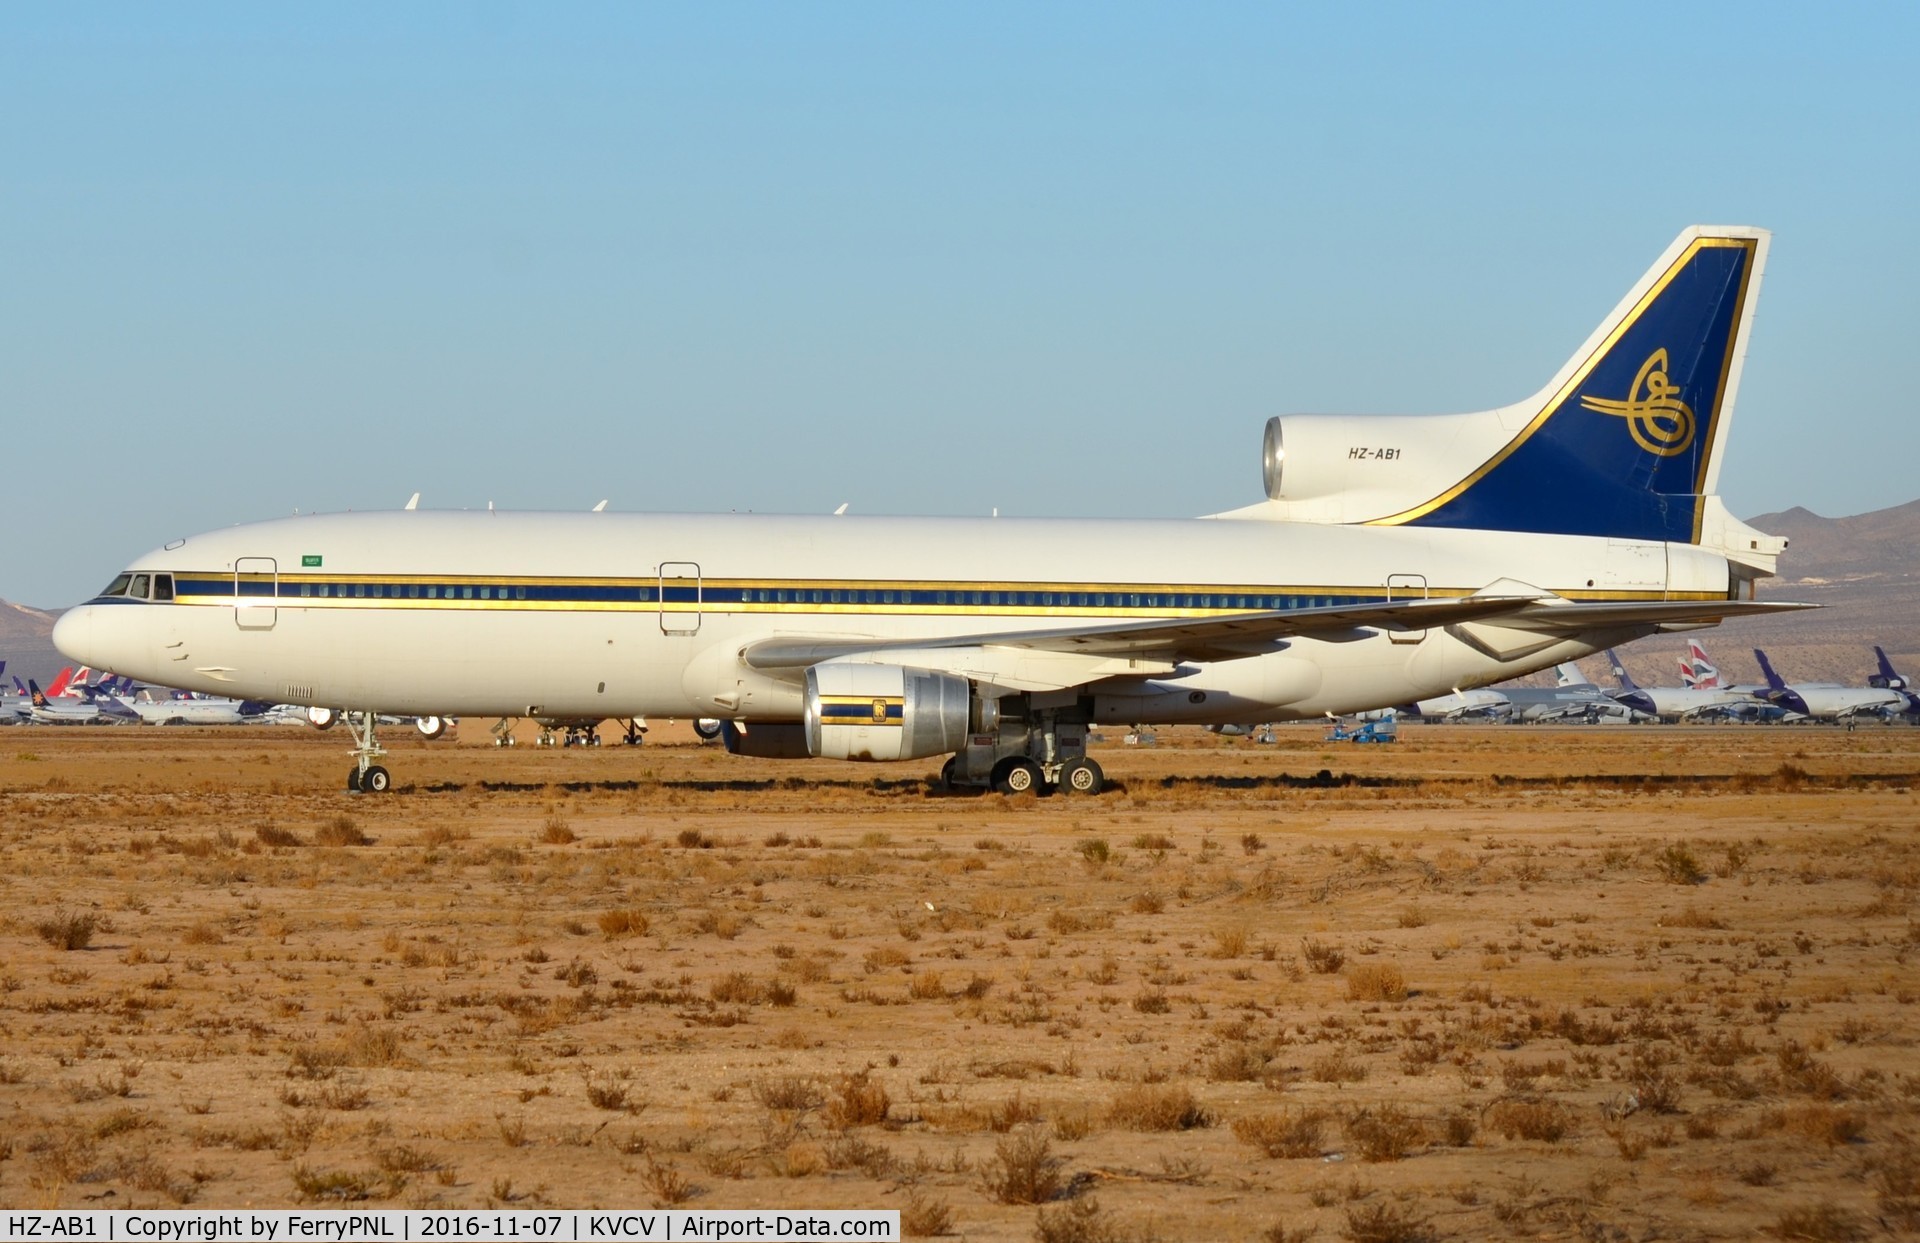 HZ-AB1, 1982 Lockheed L-1011-385-3 TriStar 500 C/N 293A-1247, This private L1015 is a long time resident of VCV.